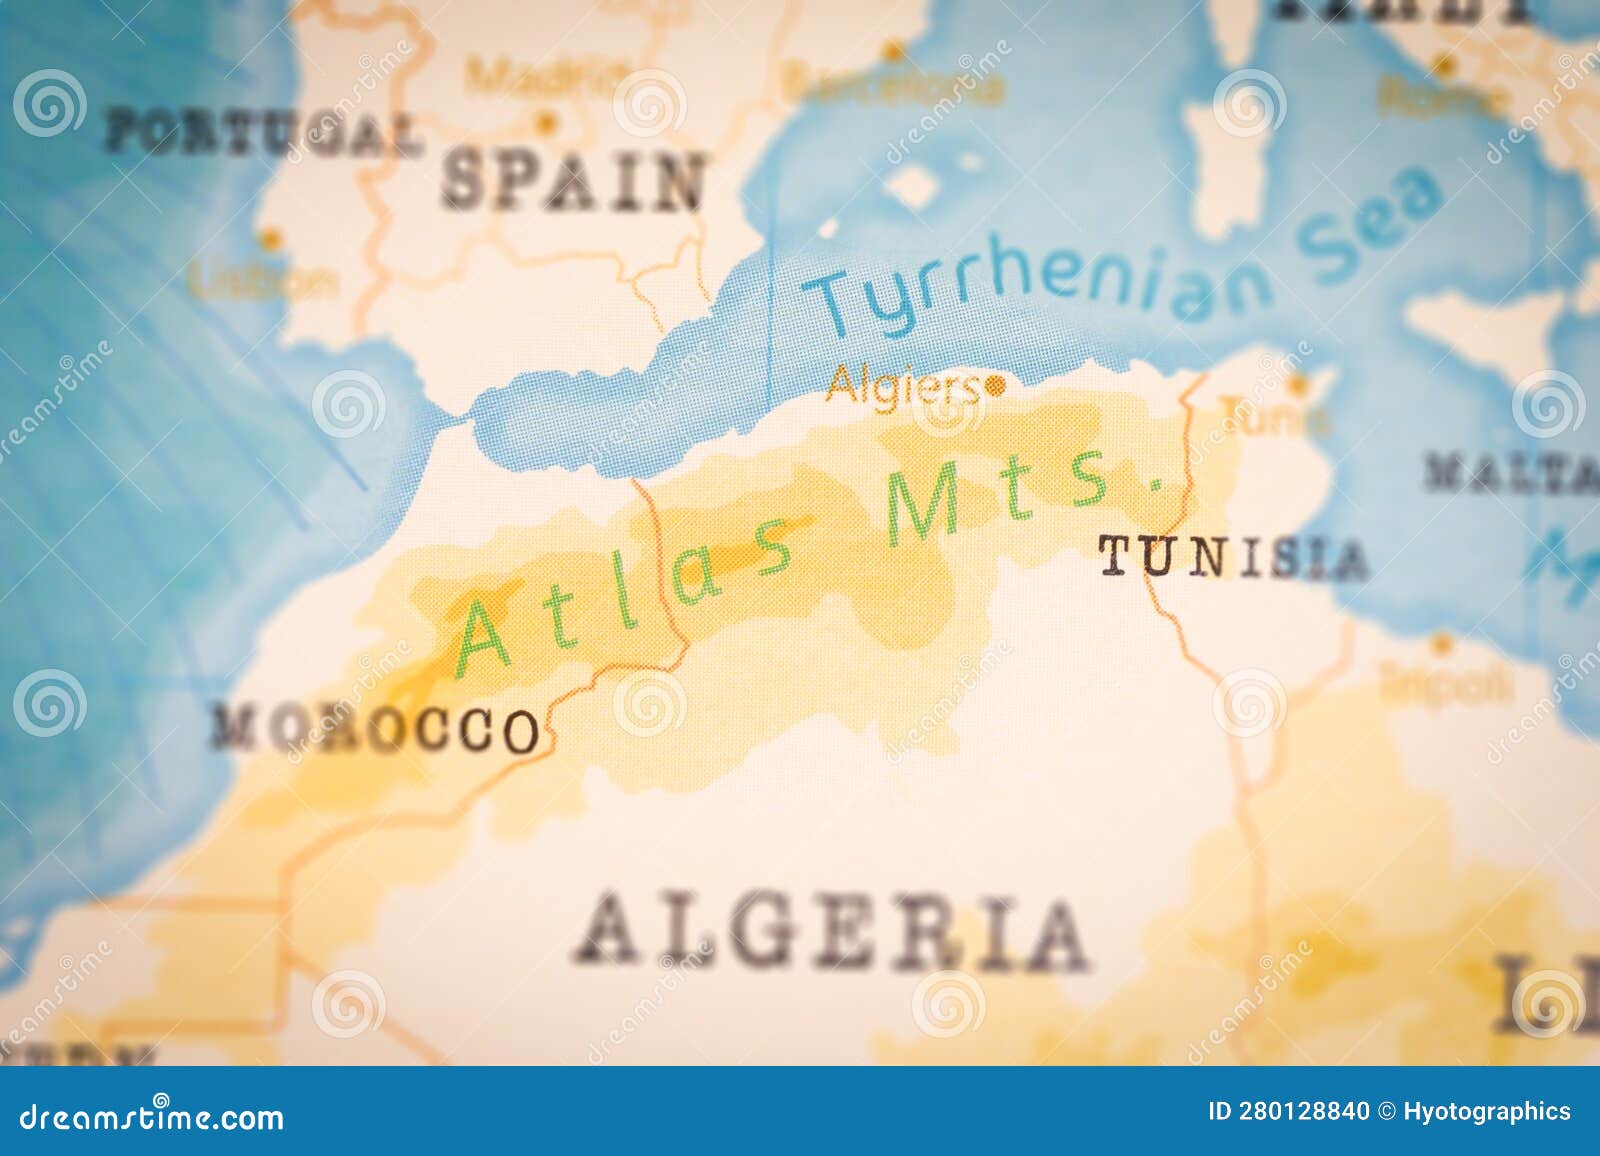 Where Are The Atlas Mountains On A Map 